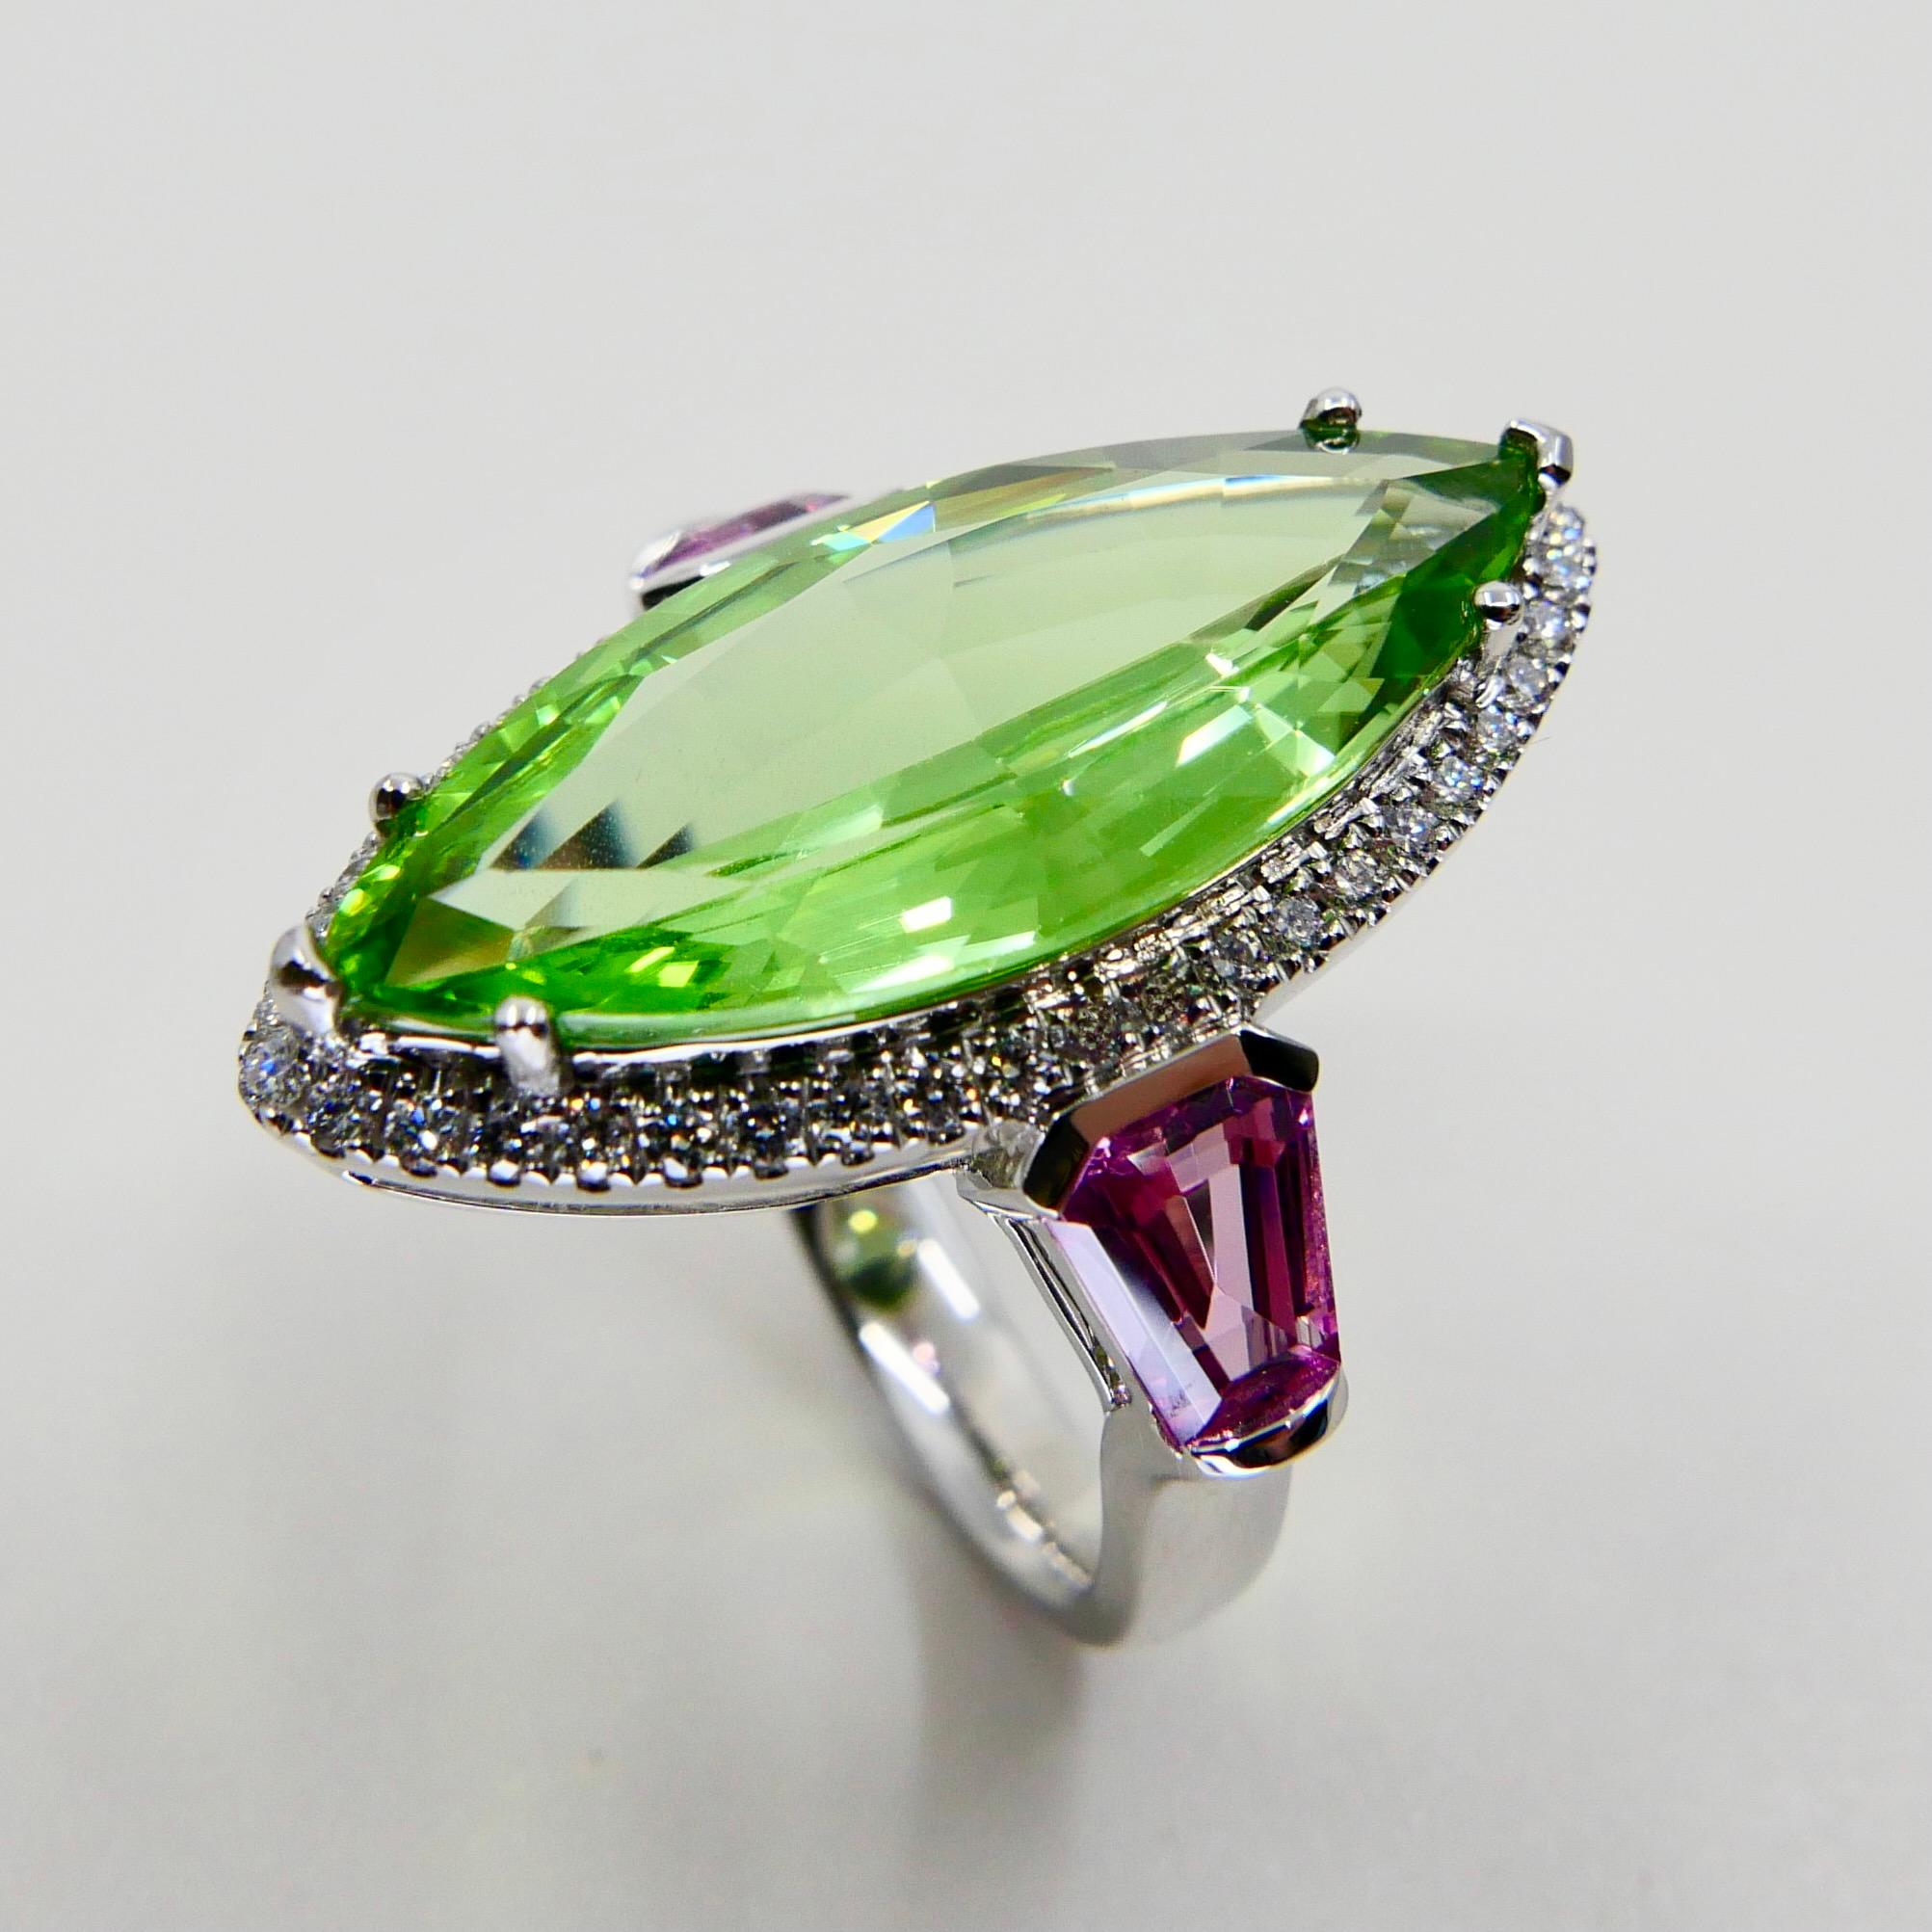 Contemporary Natural Peridot 7.38 Cts, Pink Spinel & Diamond Cocktail Ring, Statement Piece